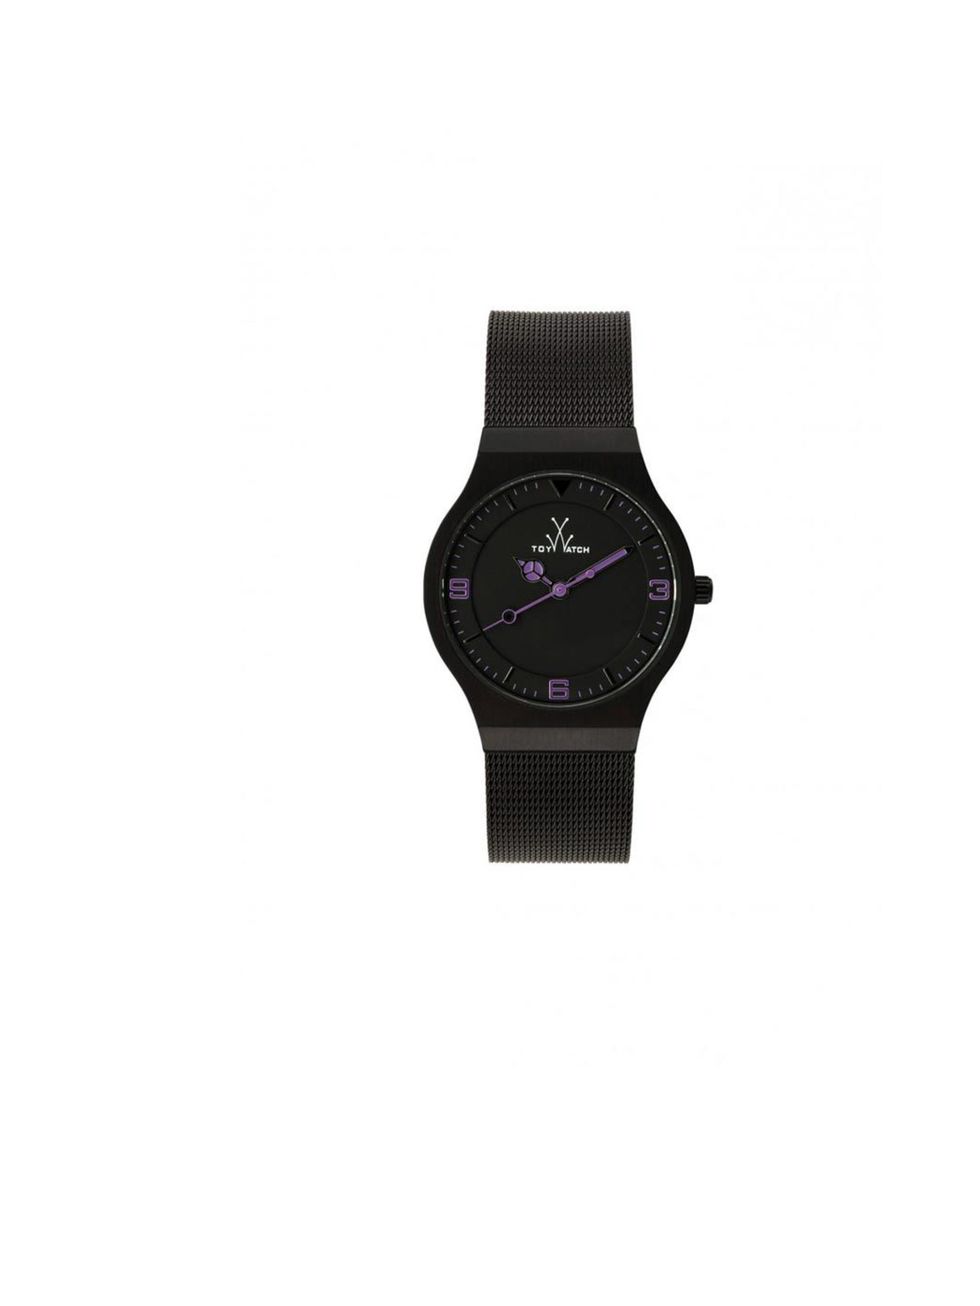 <p><a href="http://www.toy-watch.com/gb_en/shop/mesh-only-time-black-dial-130.html">ToyWatch</a> 'Mesh' black dial, £140</p>